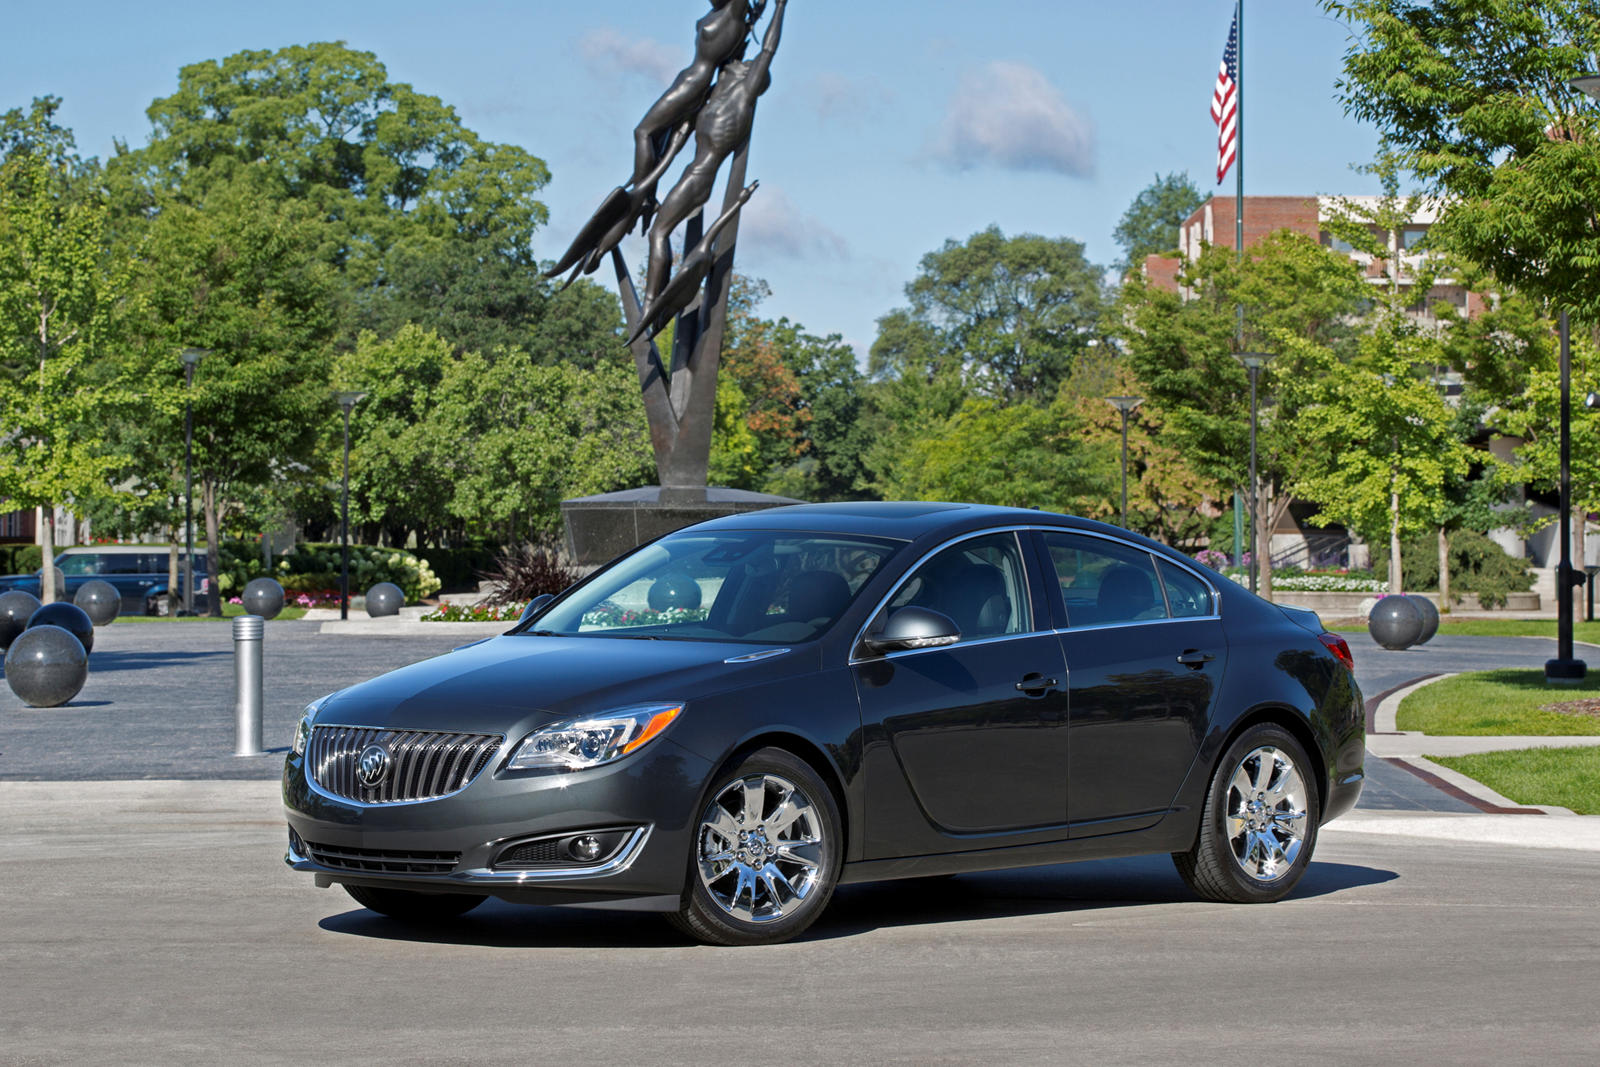 Buick Regal 2015 featured